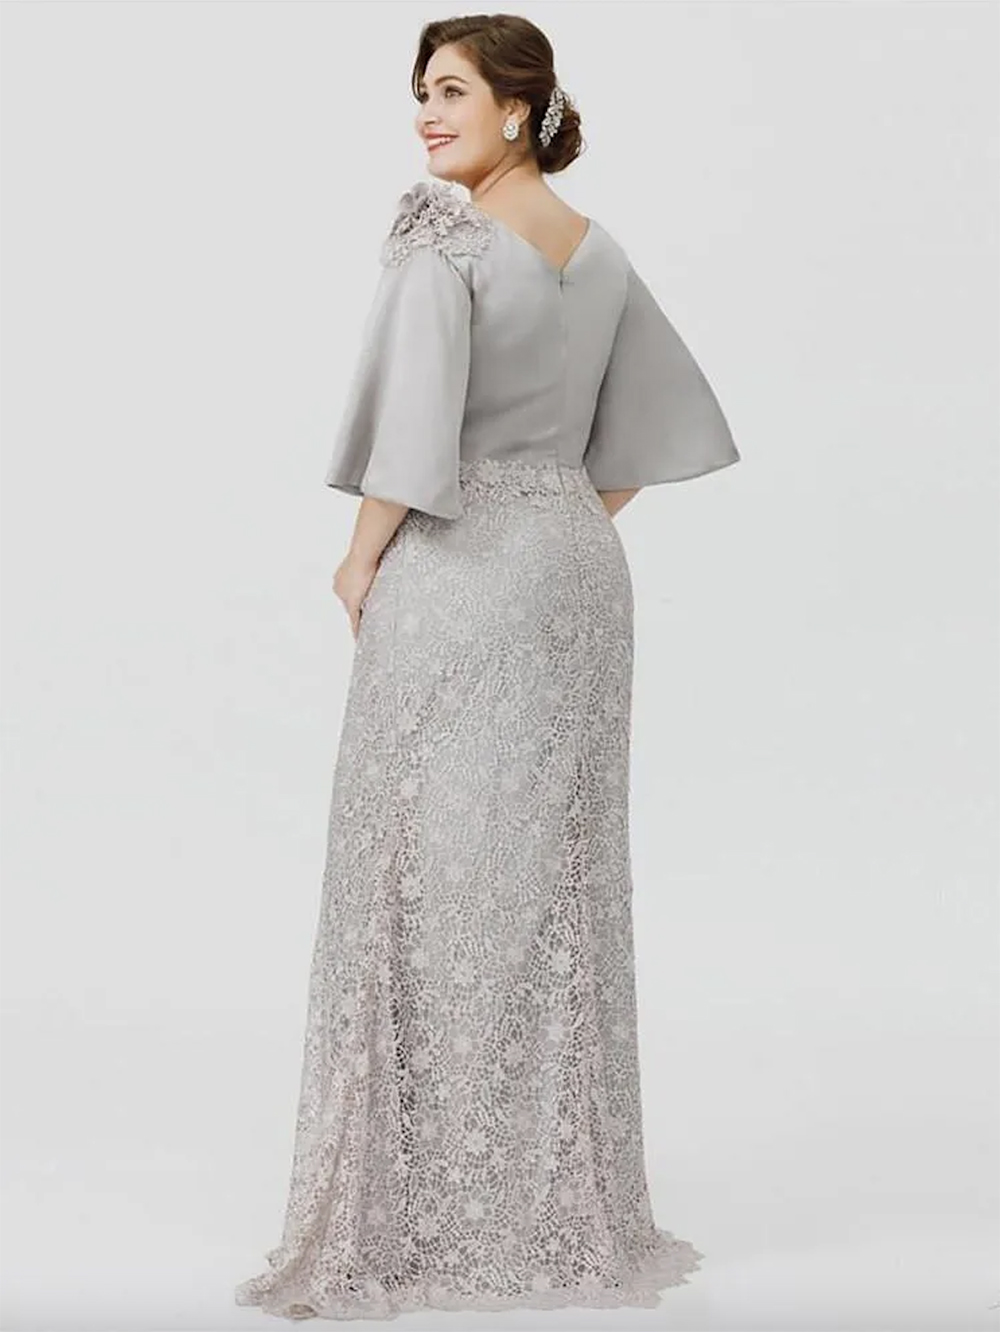 Grey A Line Mother Of The Bride Dress Jewel Neck 3/4 Long Sleeve Lace Appliqued Wedding Guest Gowns Floor-length Plus Size Evening Dresses Birthday Party Wear